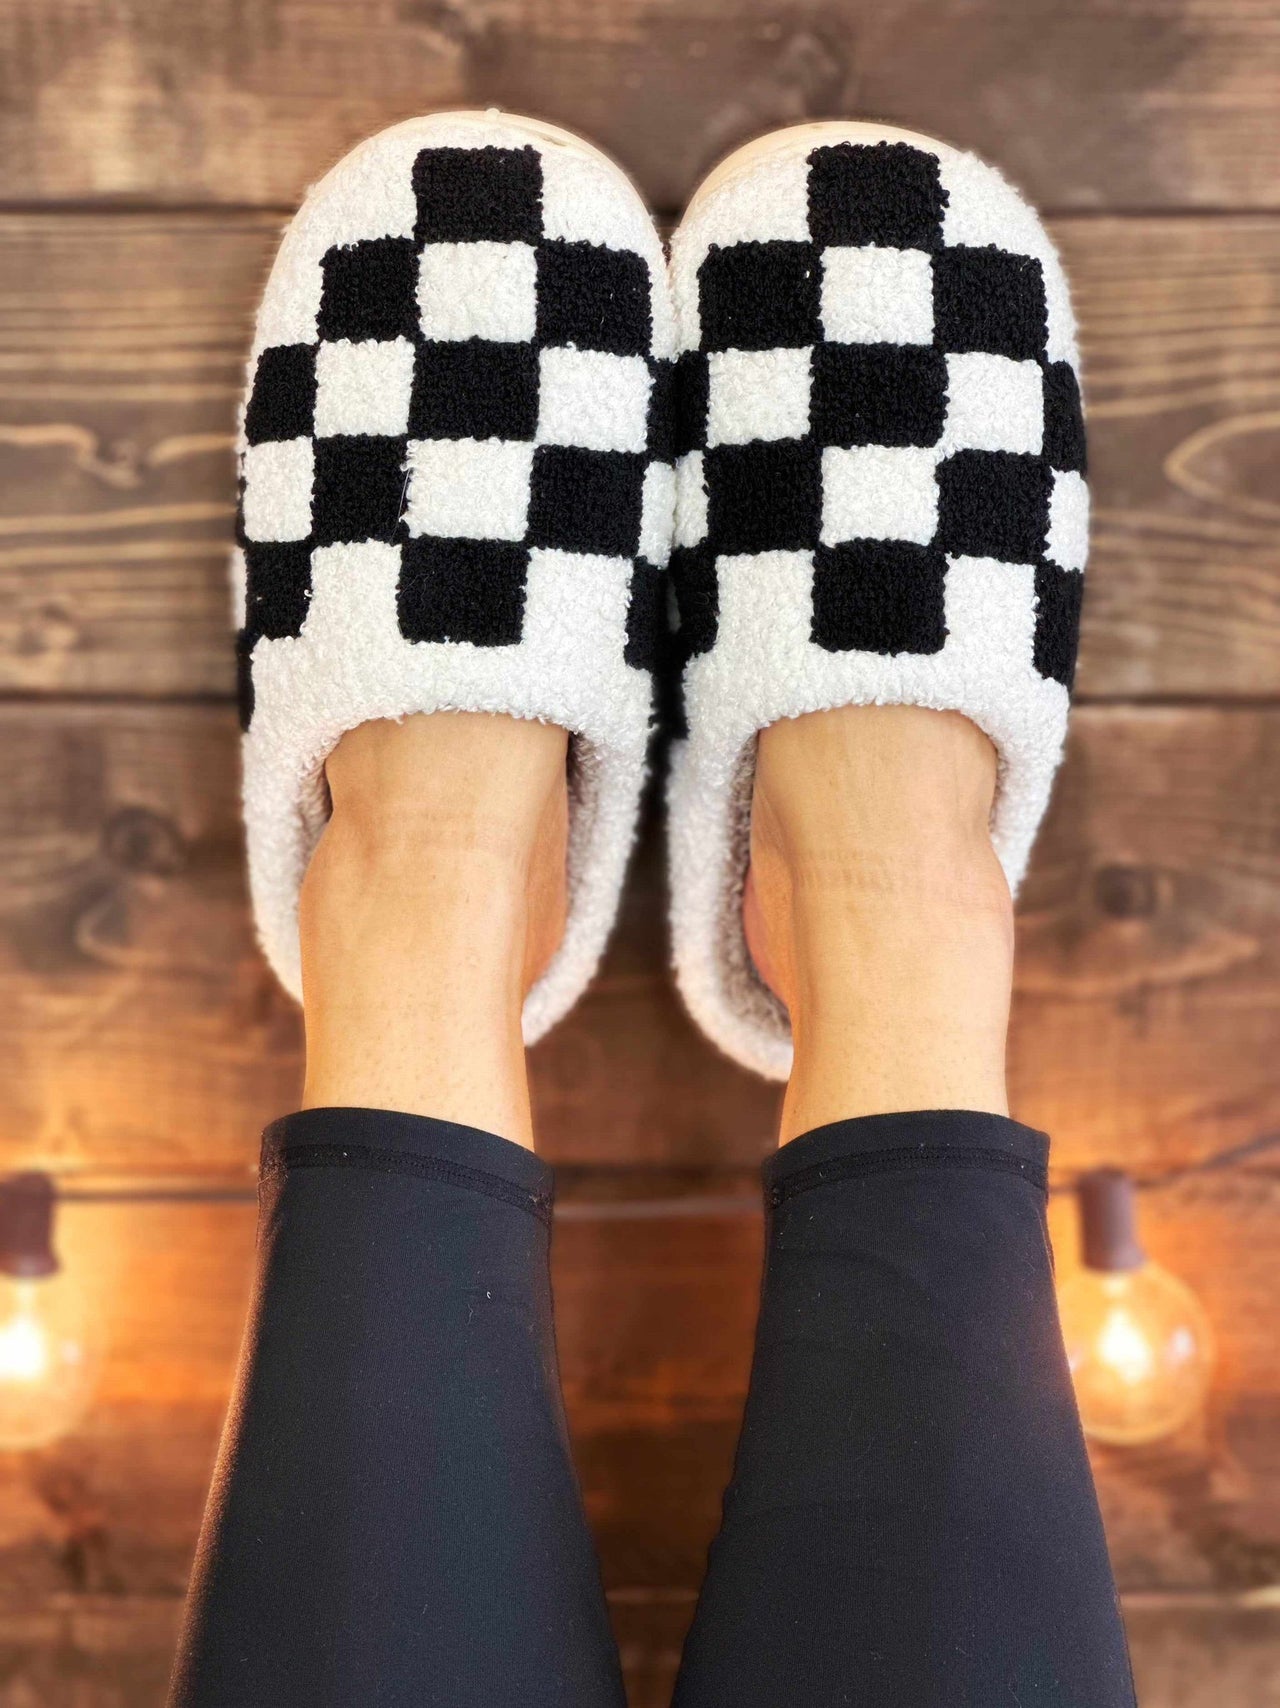 Checkered Cozy Slippers - Black